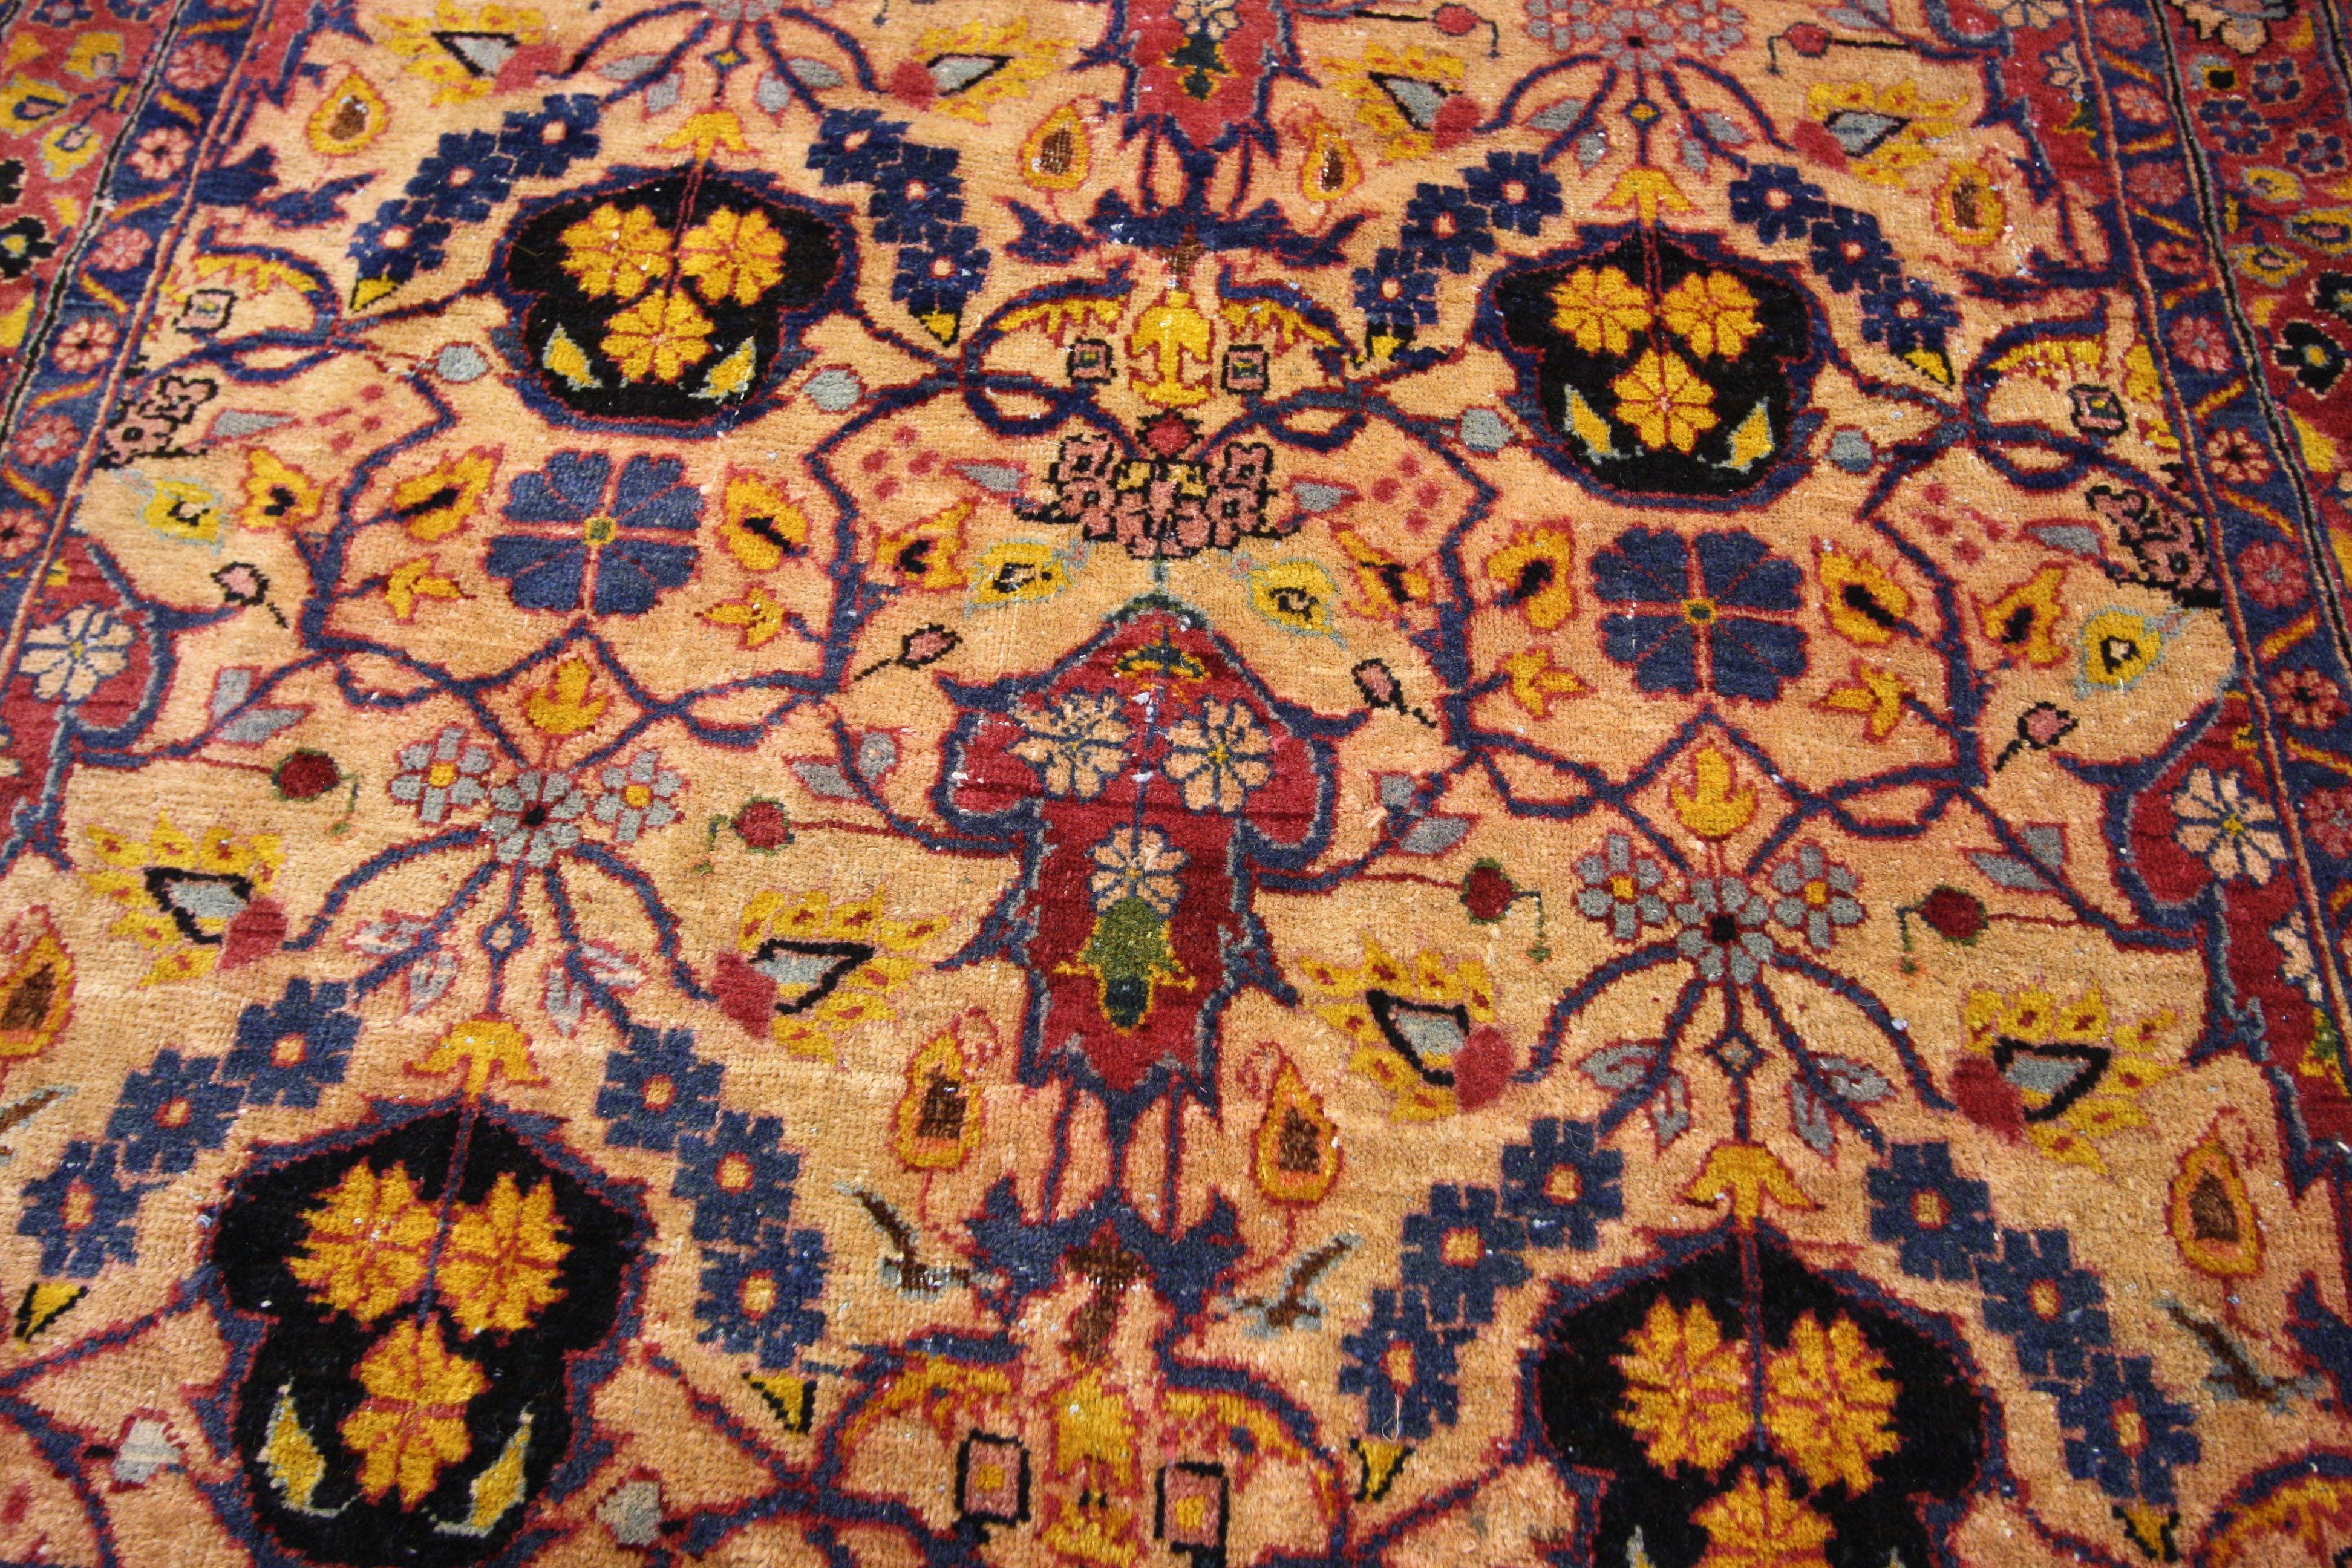 60716, antique Persian Kashan accent rug, foyer or entry rug. This hand knotted wool antique Persian Kashan rug features an all-over floral design on an abrashed field. Blooms, buds, palmettes, rosettes, vines, leaflets and small vases adorn every